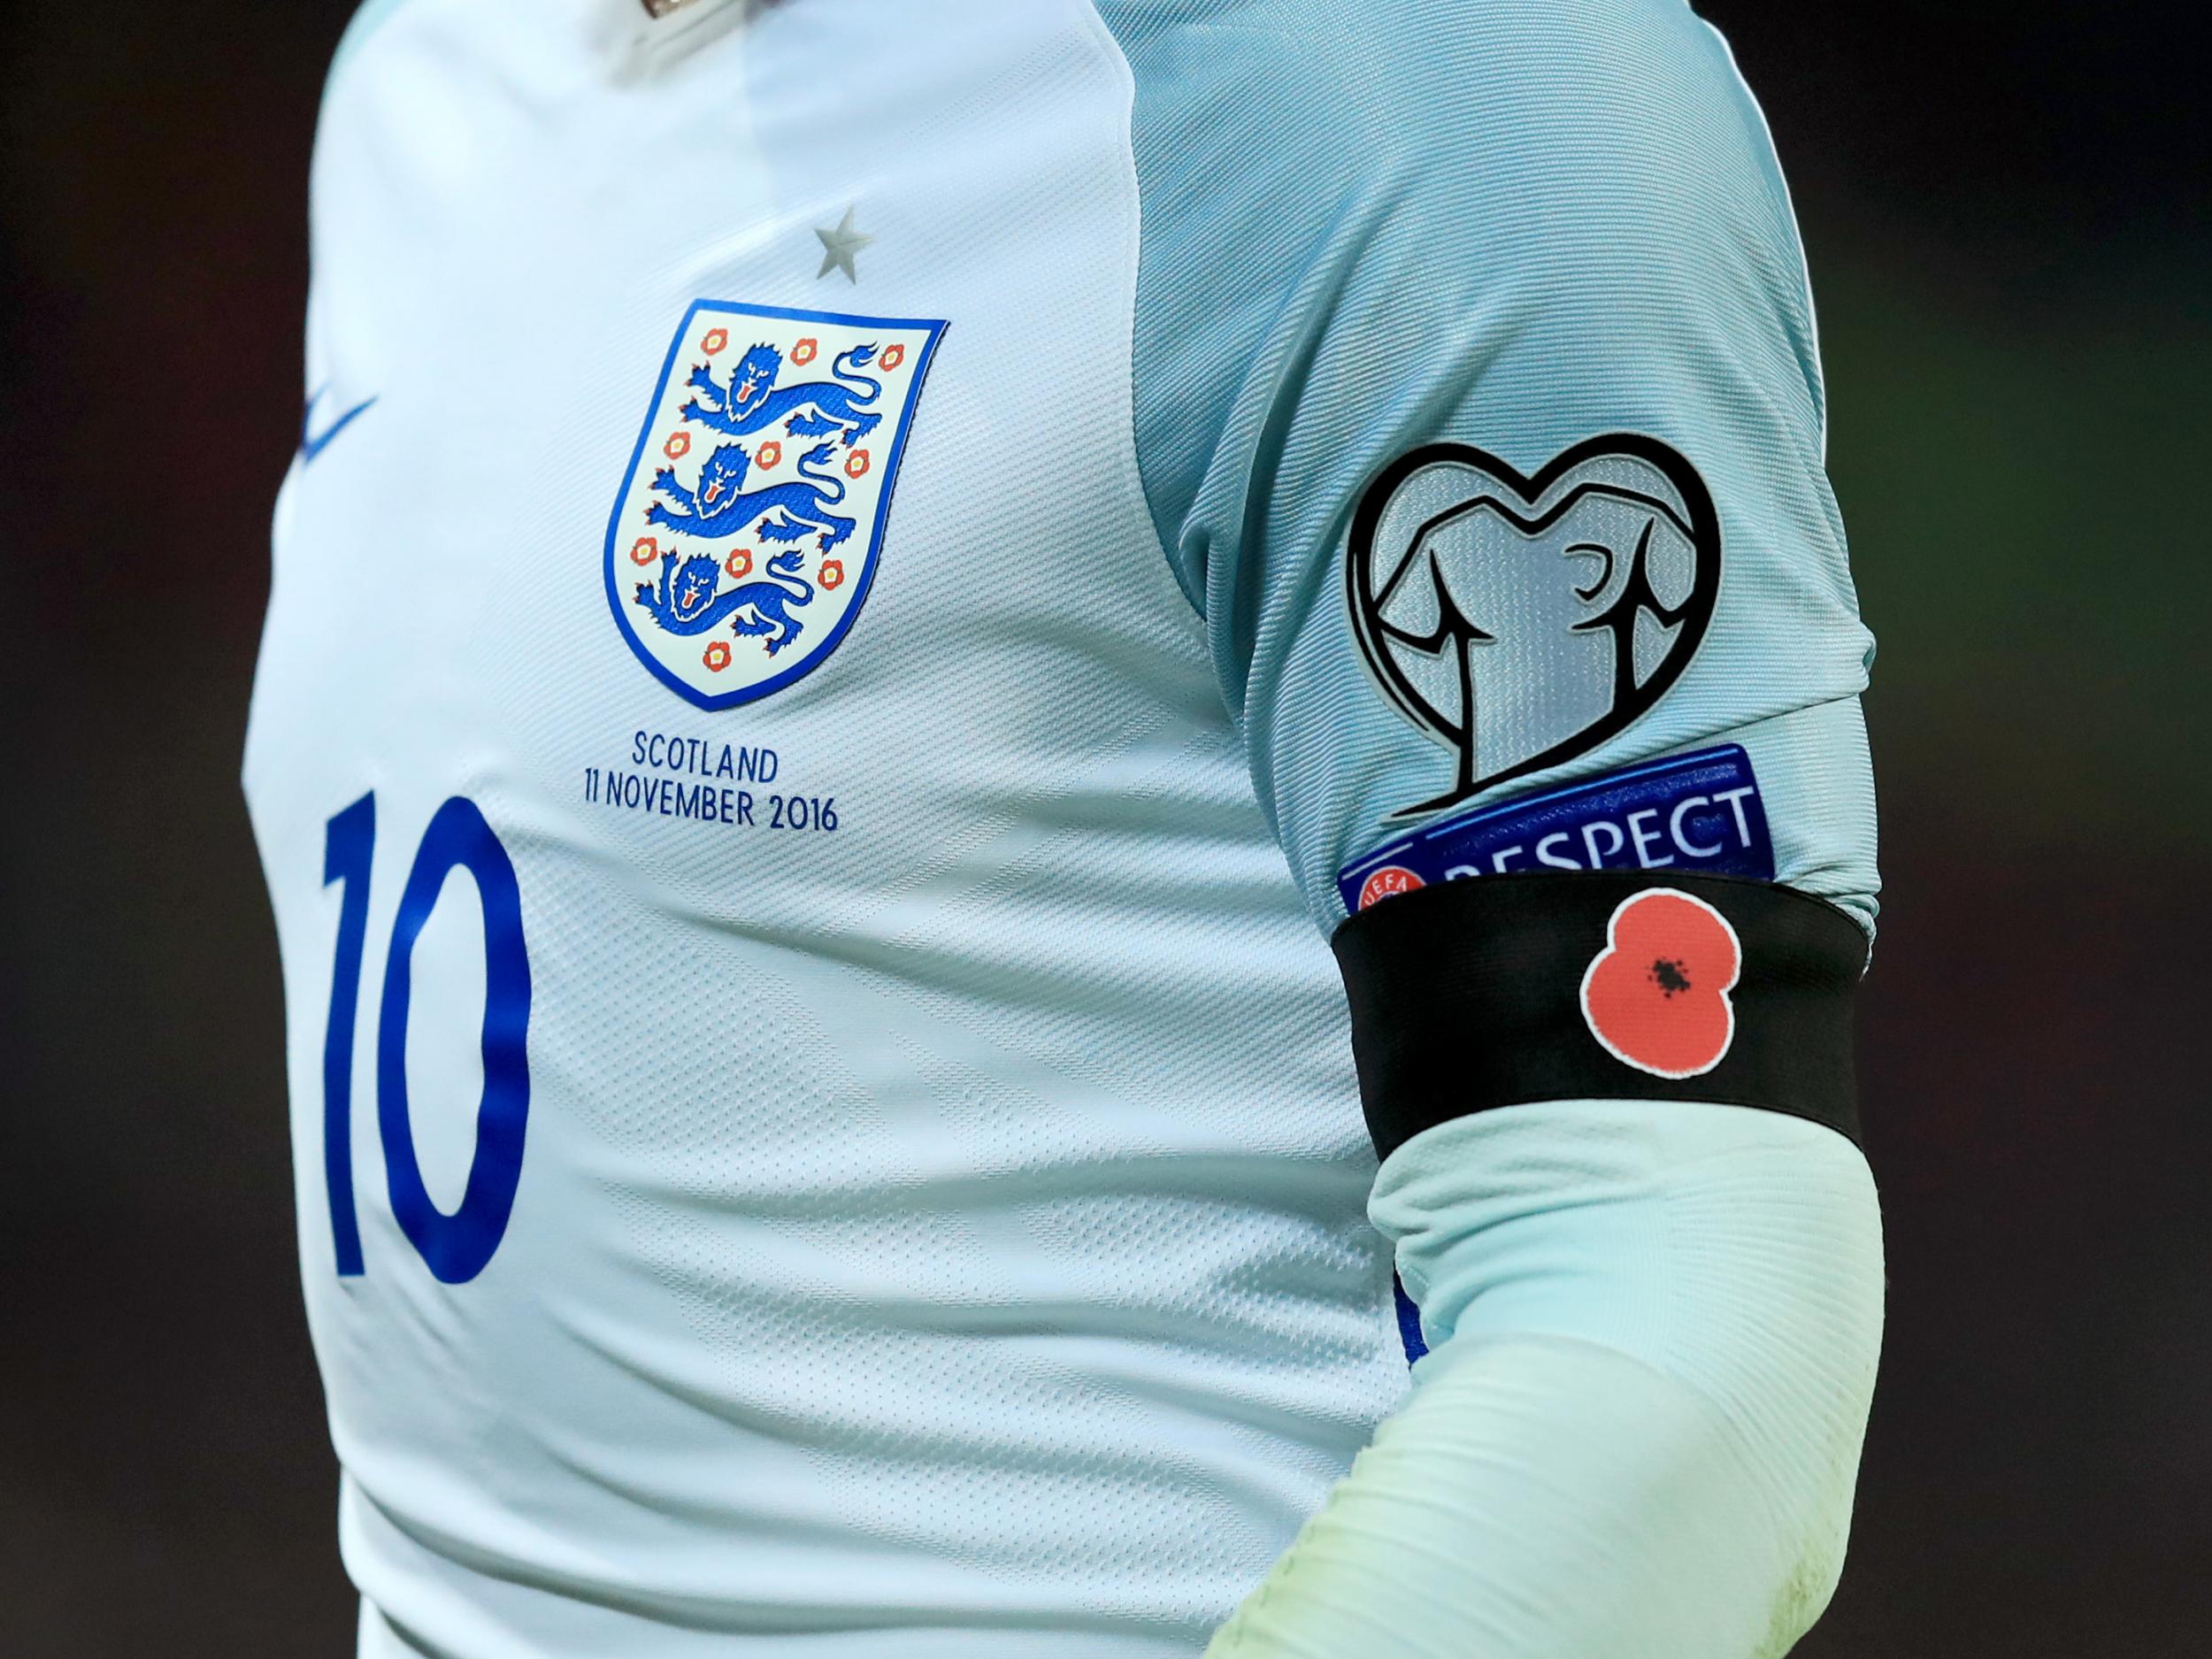 Fifa rejected the countries' request to wear the poppy